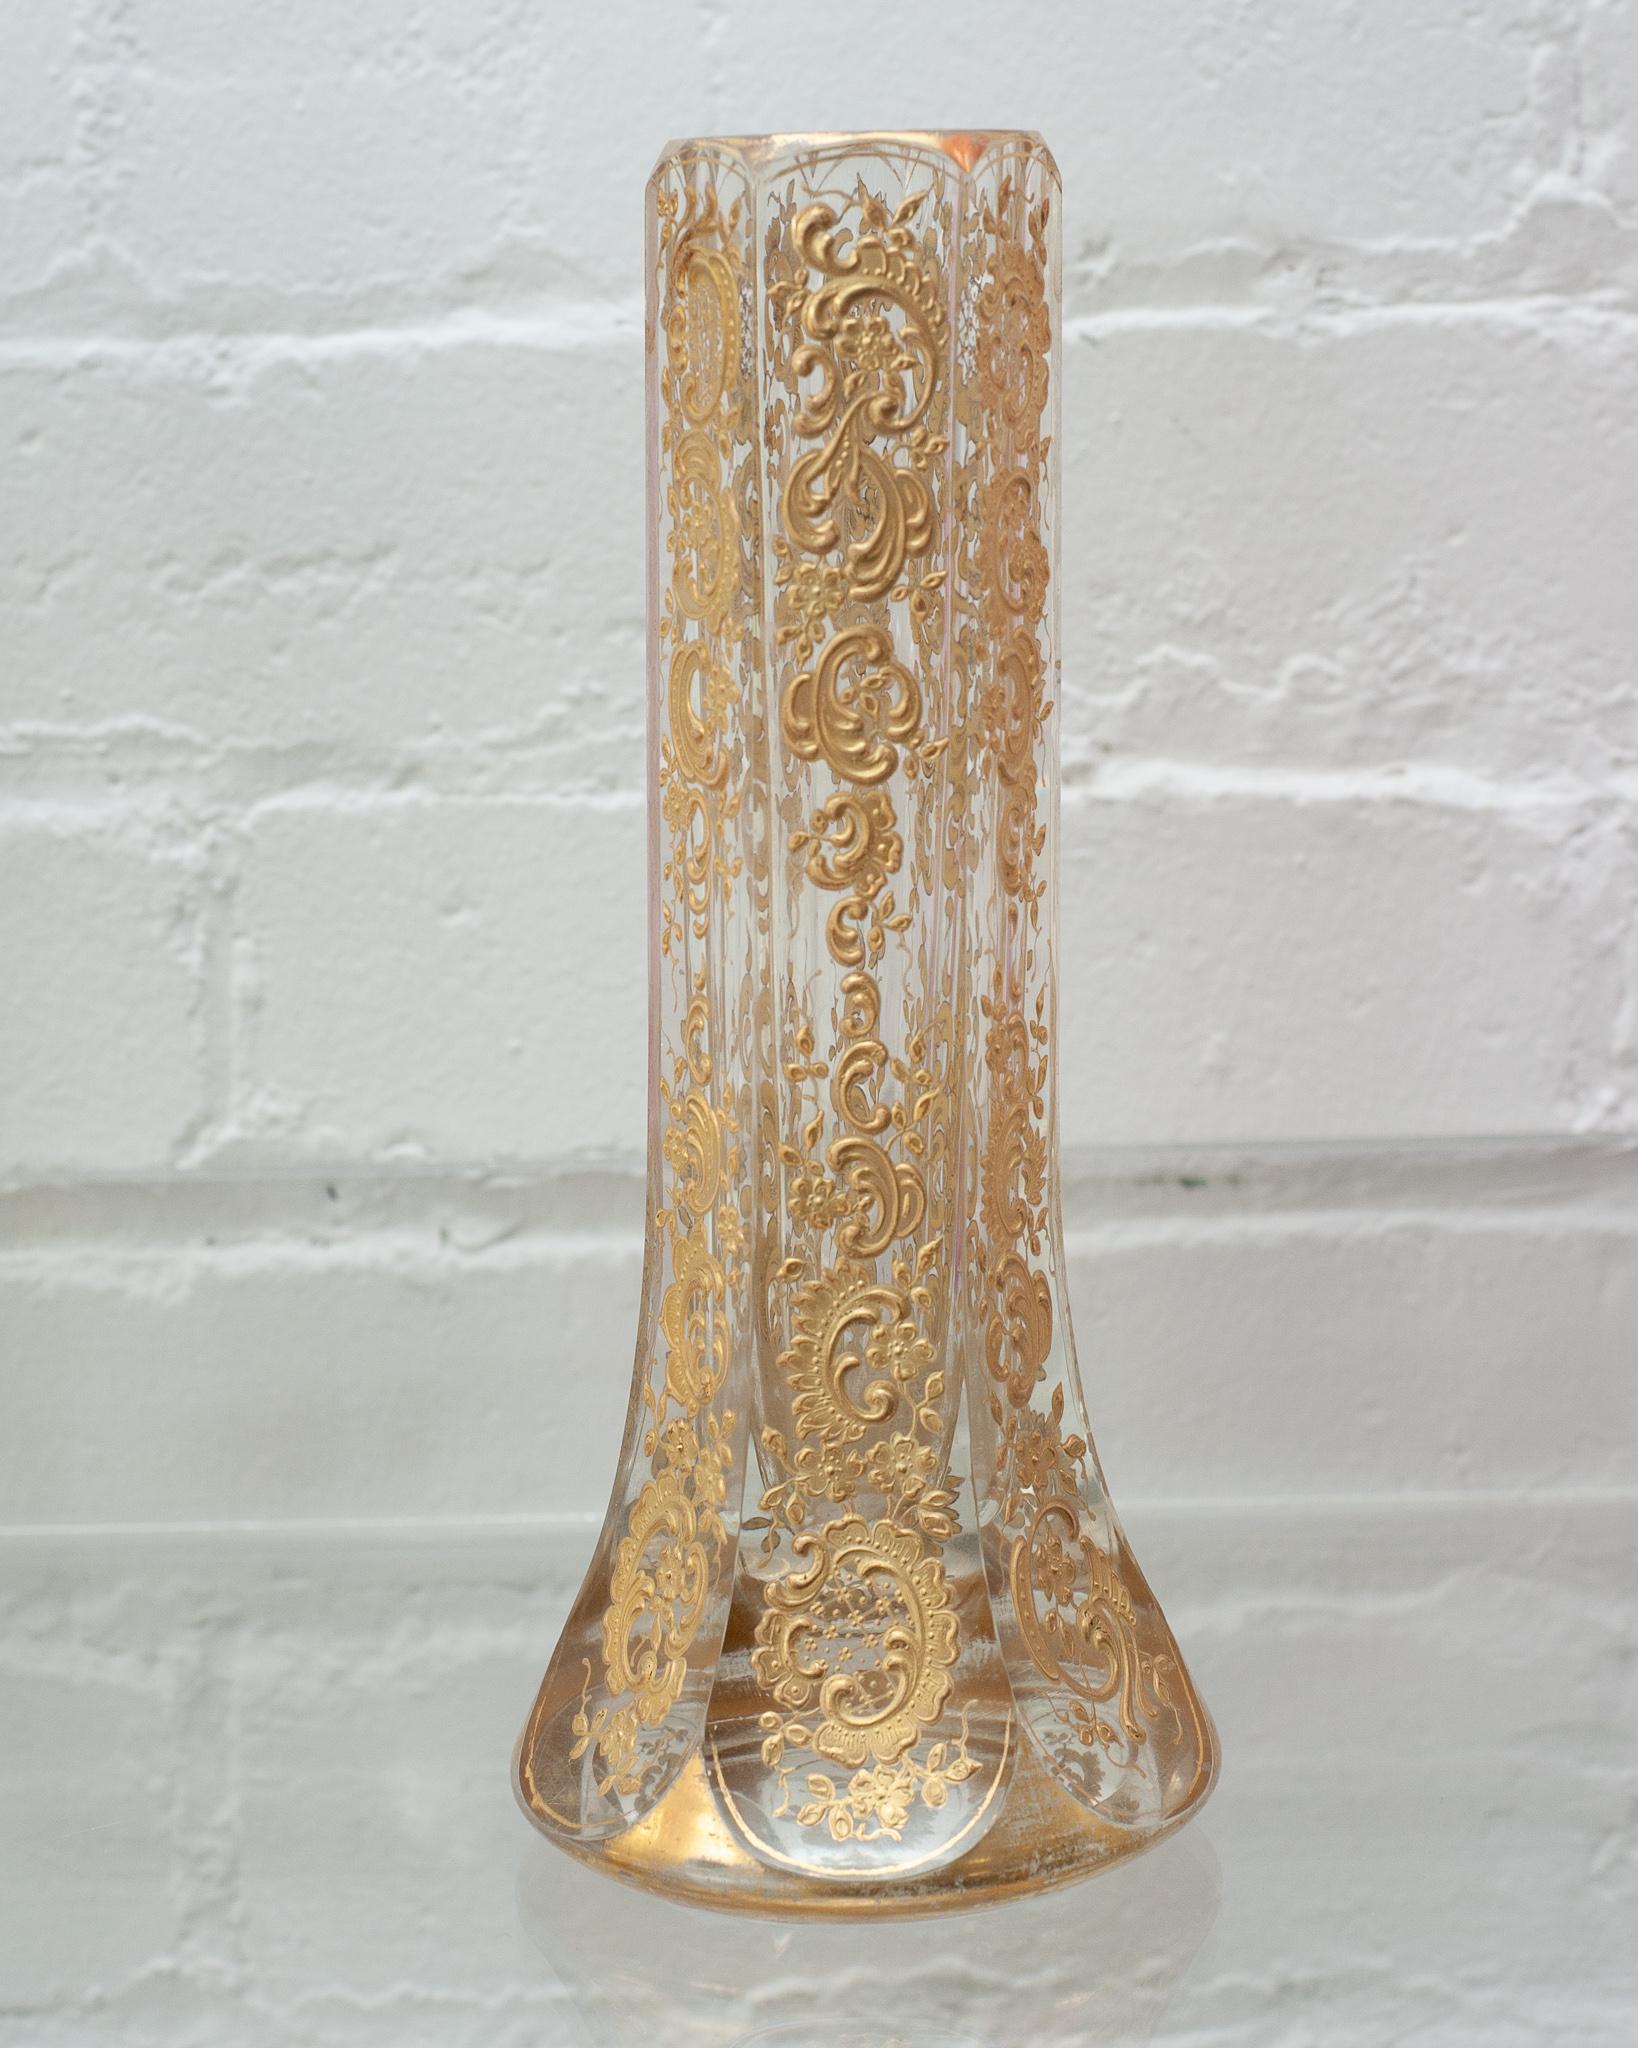 A stunning flared Moser crystal vase with elaborate and heavy gilding. A perfect bud vase, this vessel is as beautiful empty as it is filled. Very sturdy and solid quality.